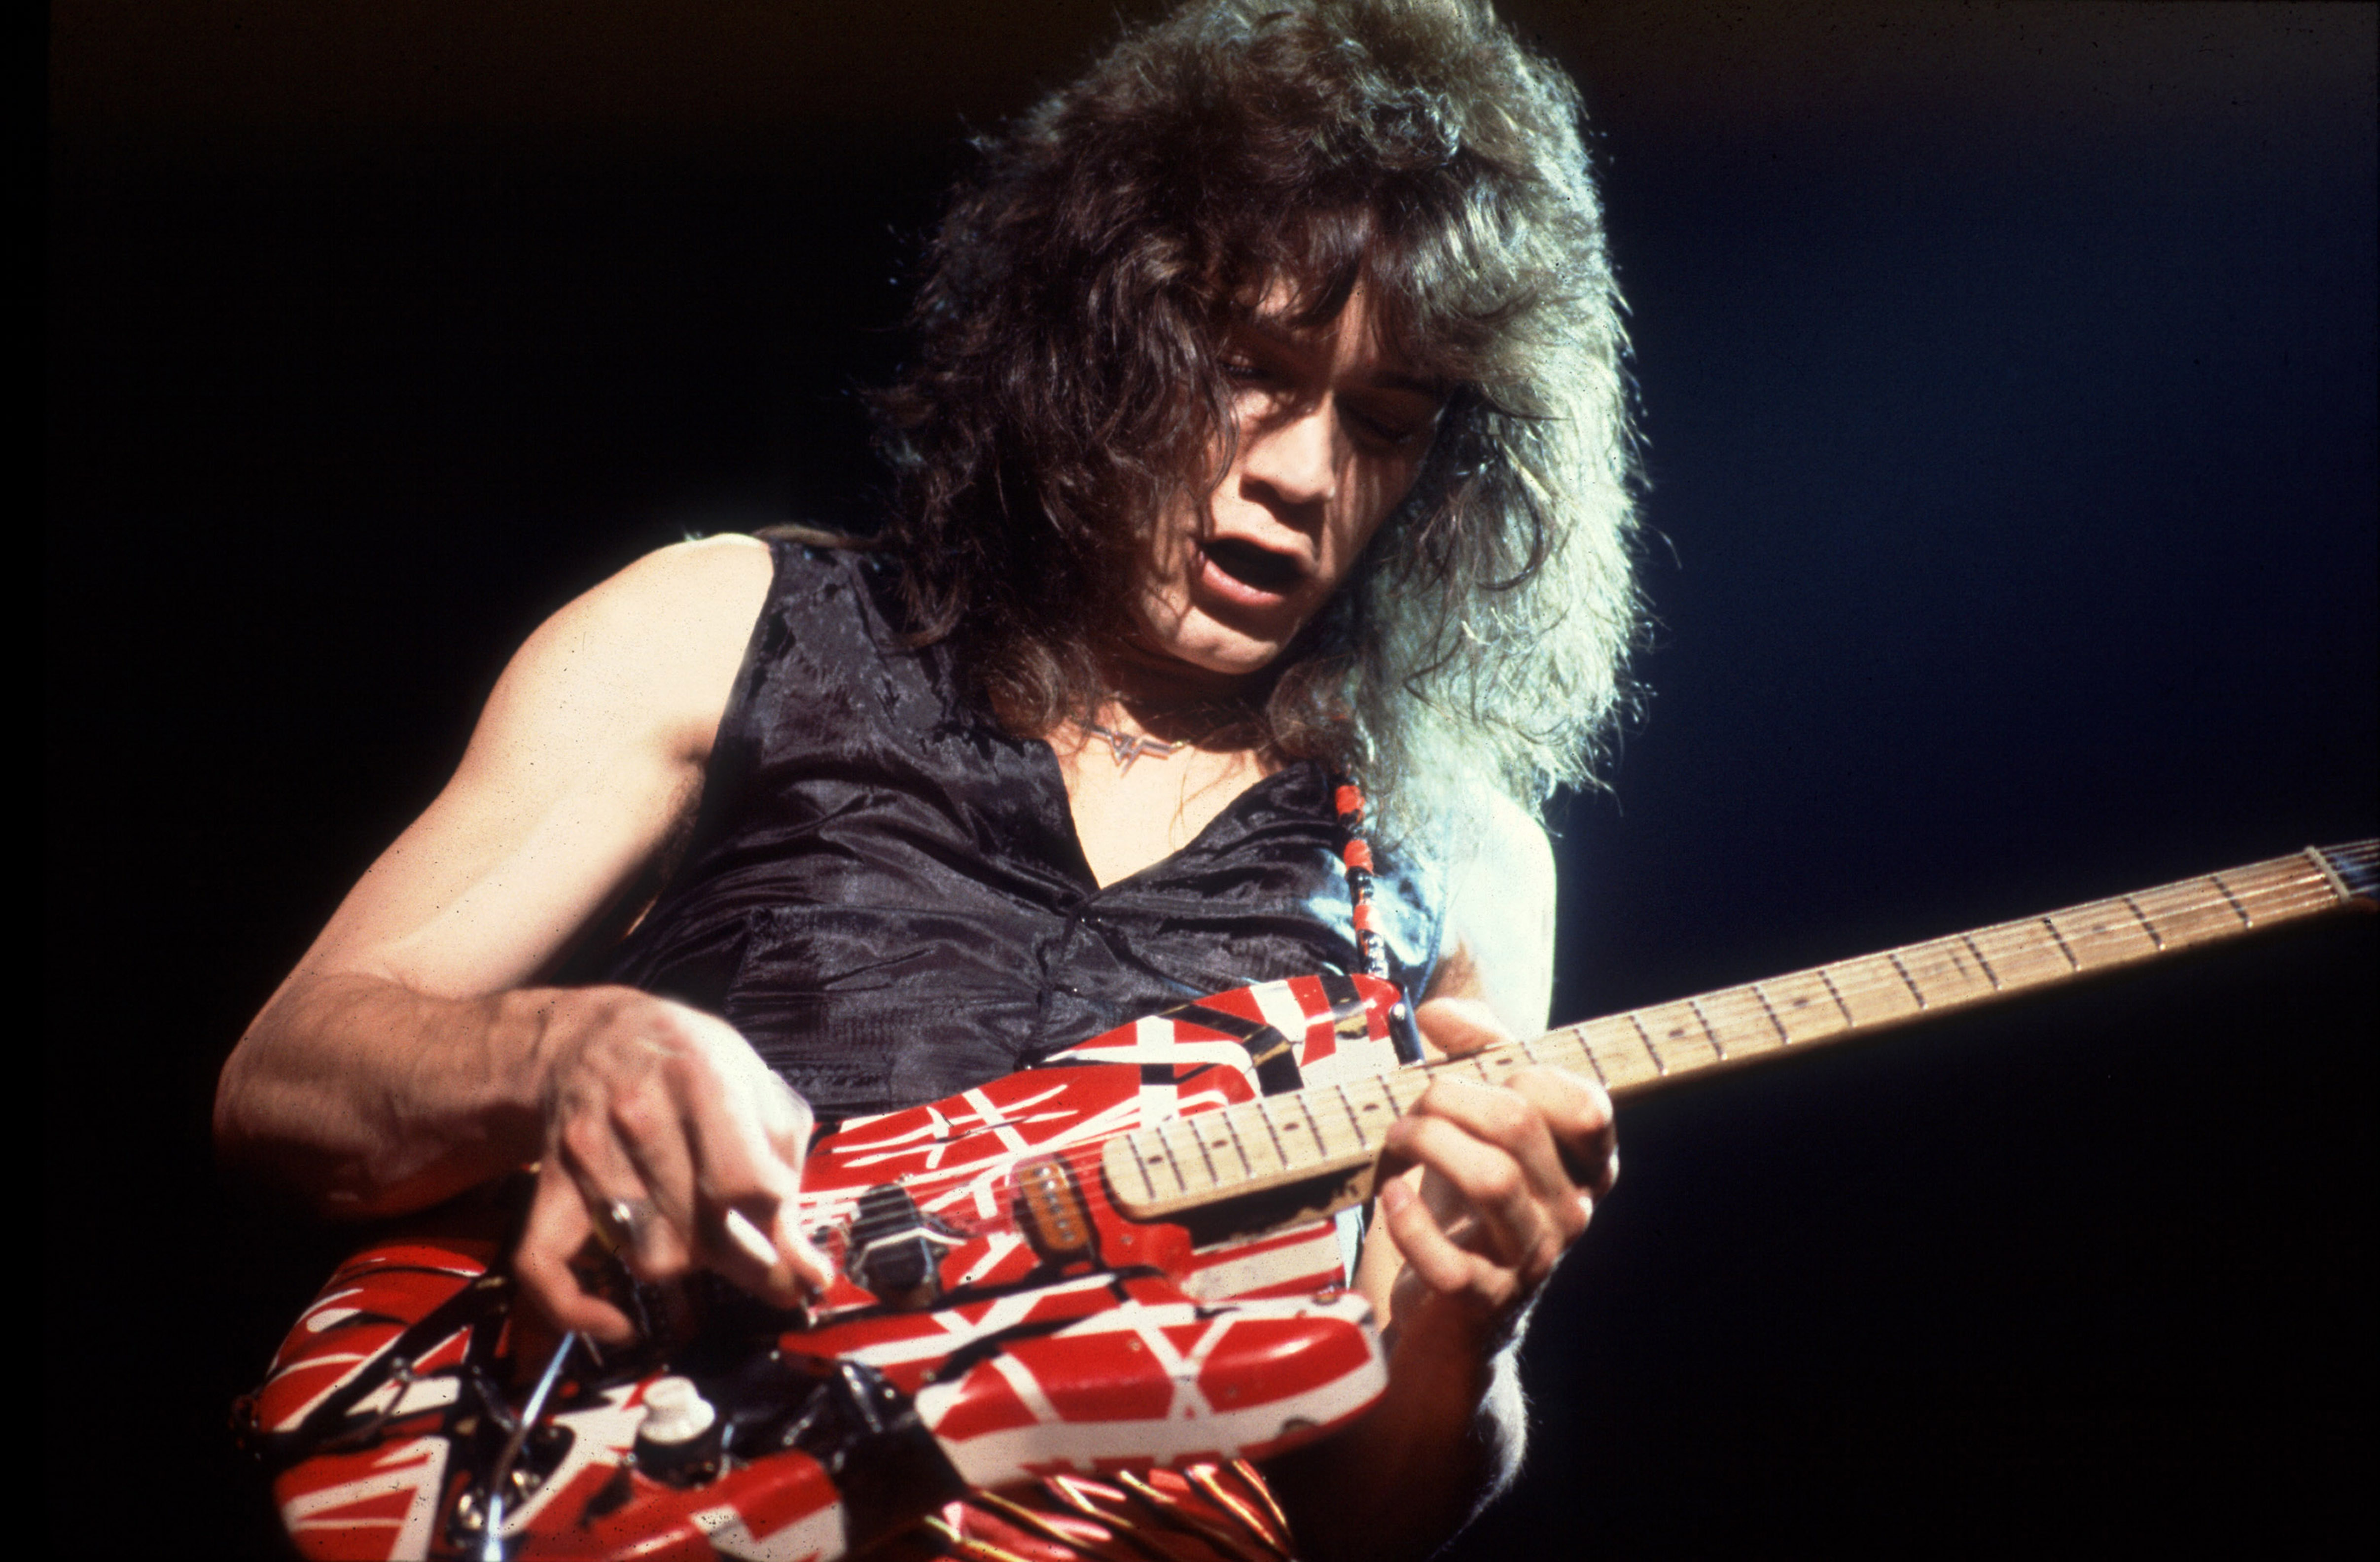 Eruption Conversations With Eddie Van Halen Is A Definitive New Biography Based On 50 Hours Of